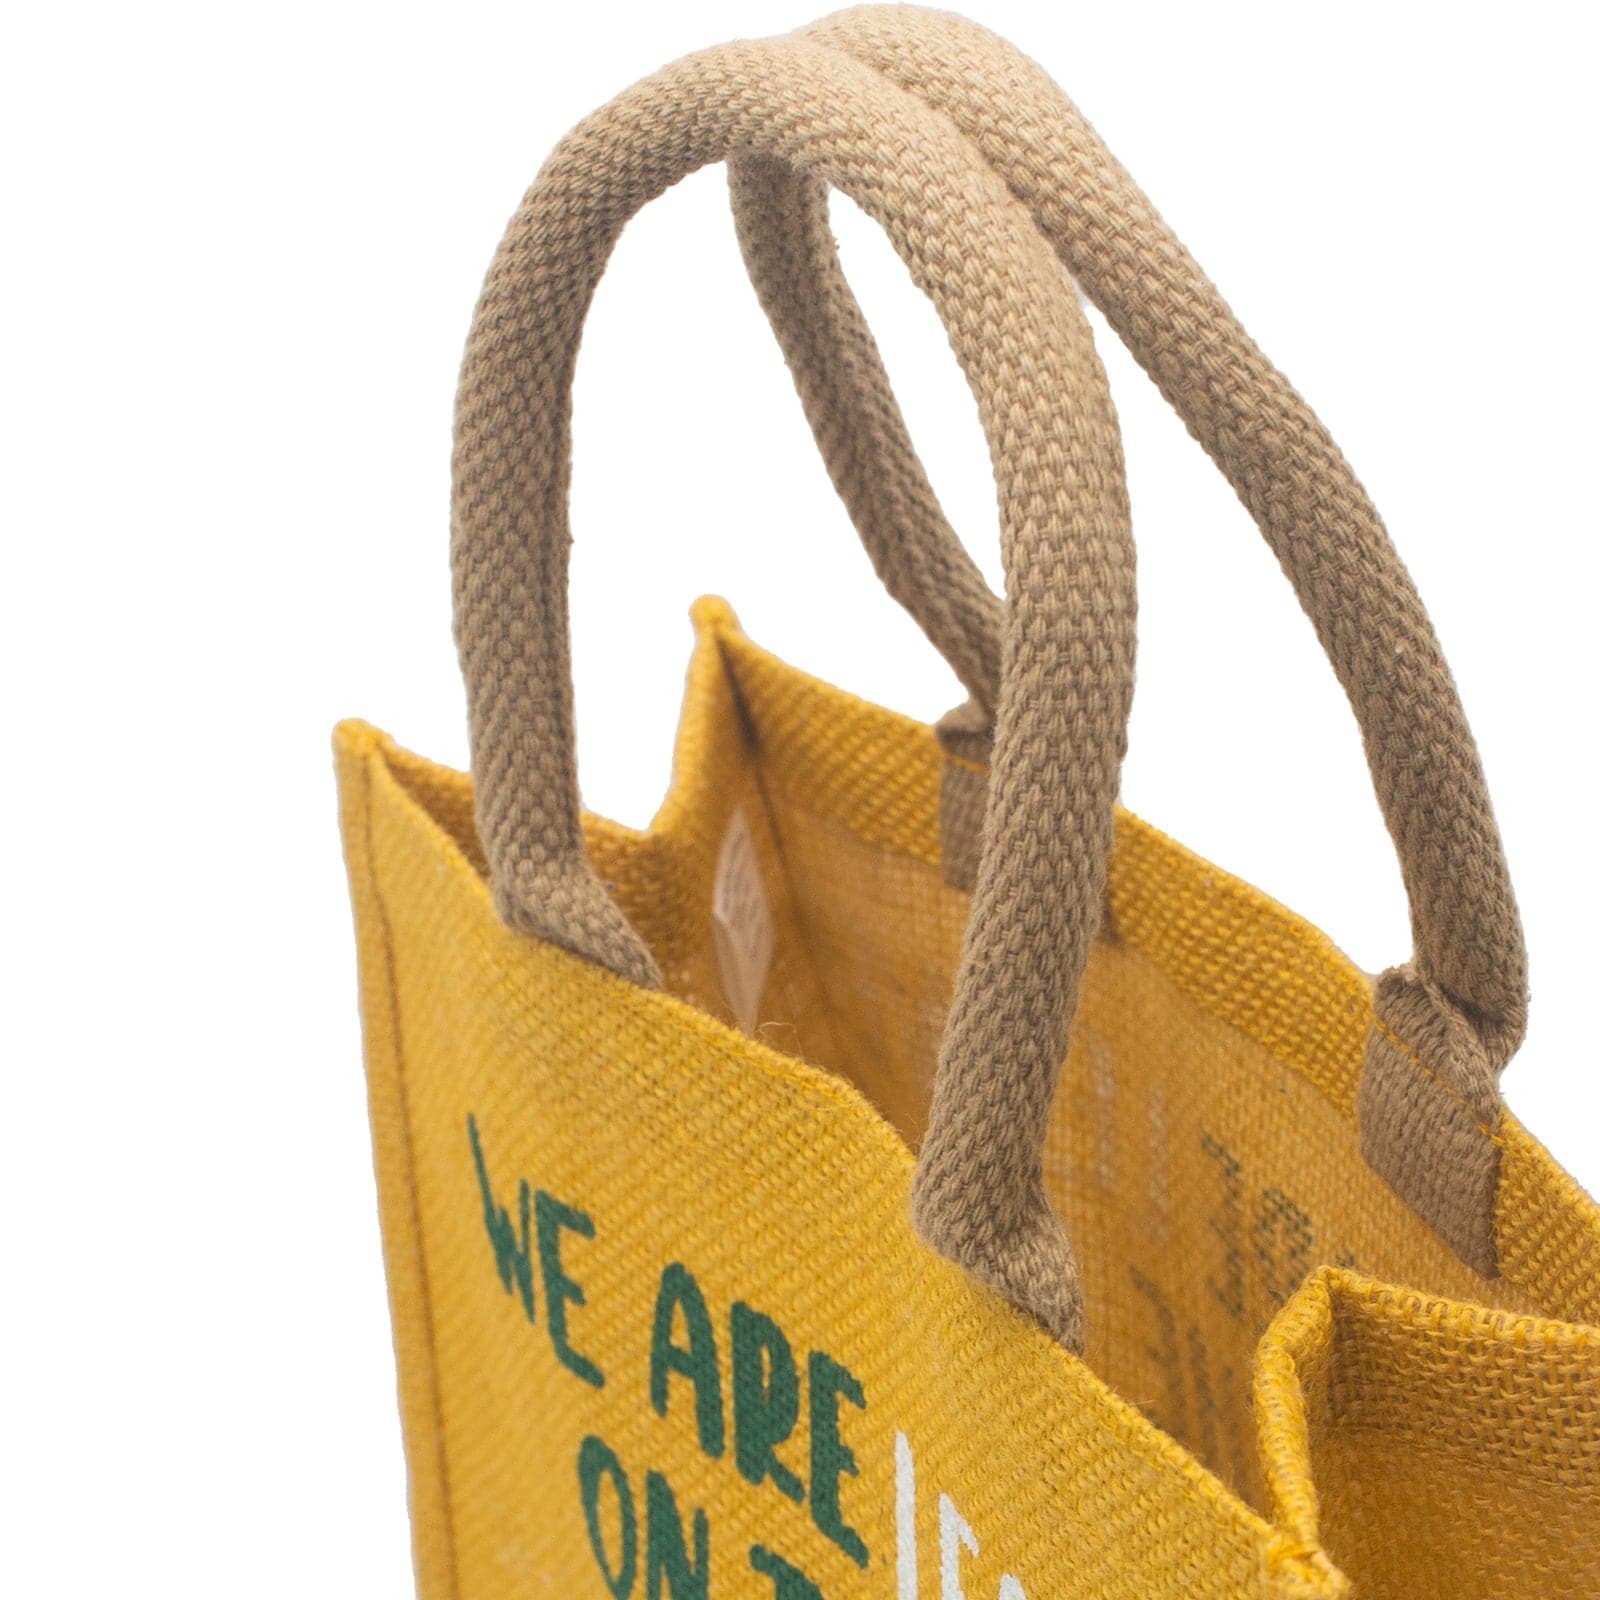 Printed Jute Bag - We are Leaves - Yellow - best price from Maltashopper.com PJB-02A